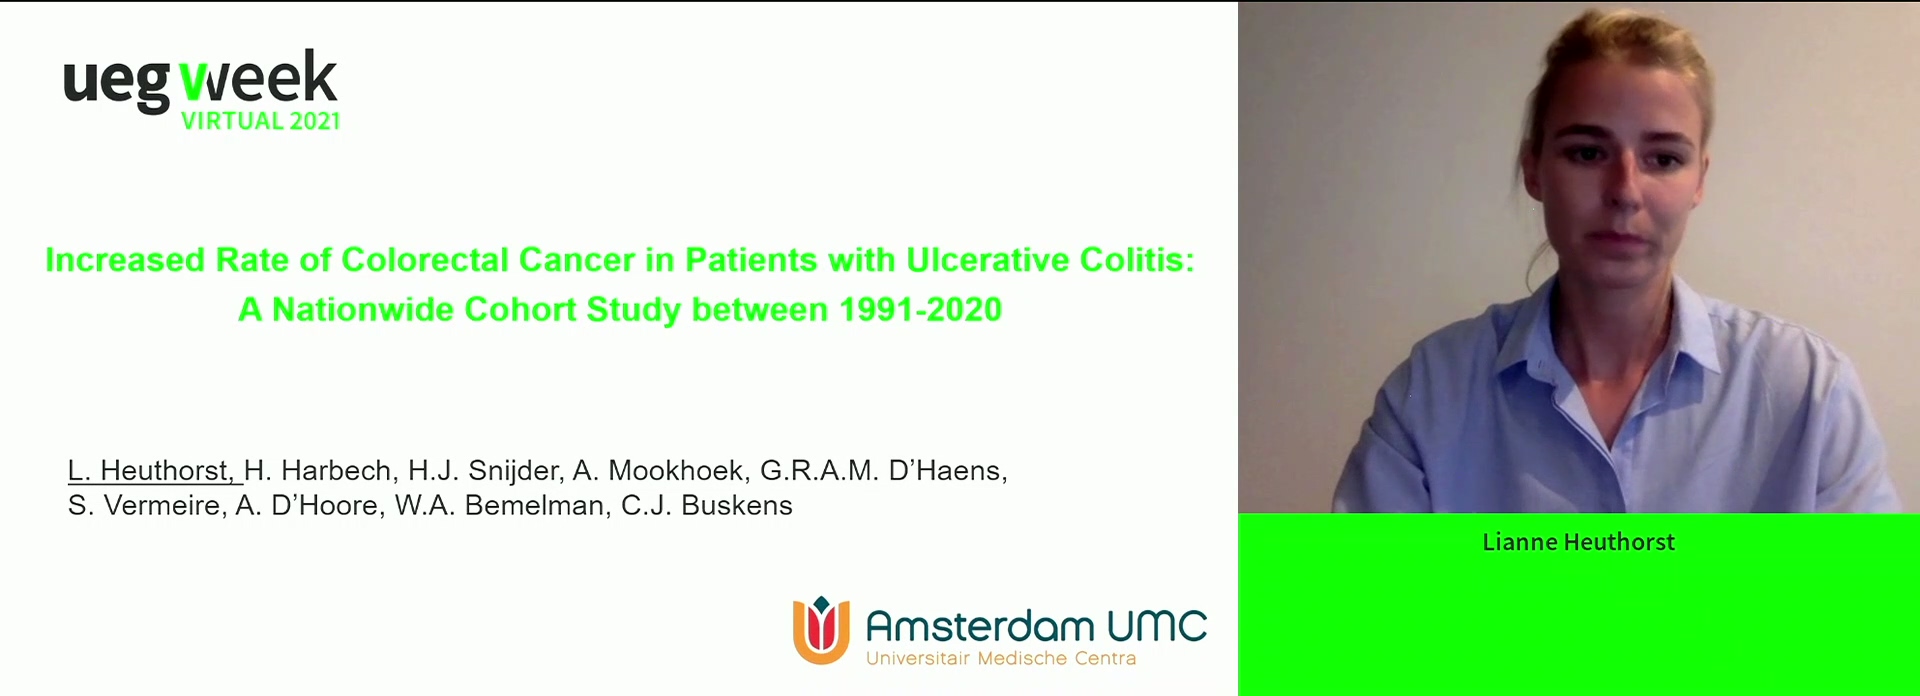 INCREASED RATE OF COLORECTAL CANCER IN PATIENTS WITH ULCERATIVE COLITIS: A NATIONAL COHORT STUDY BETWEEN 1991-2020